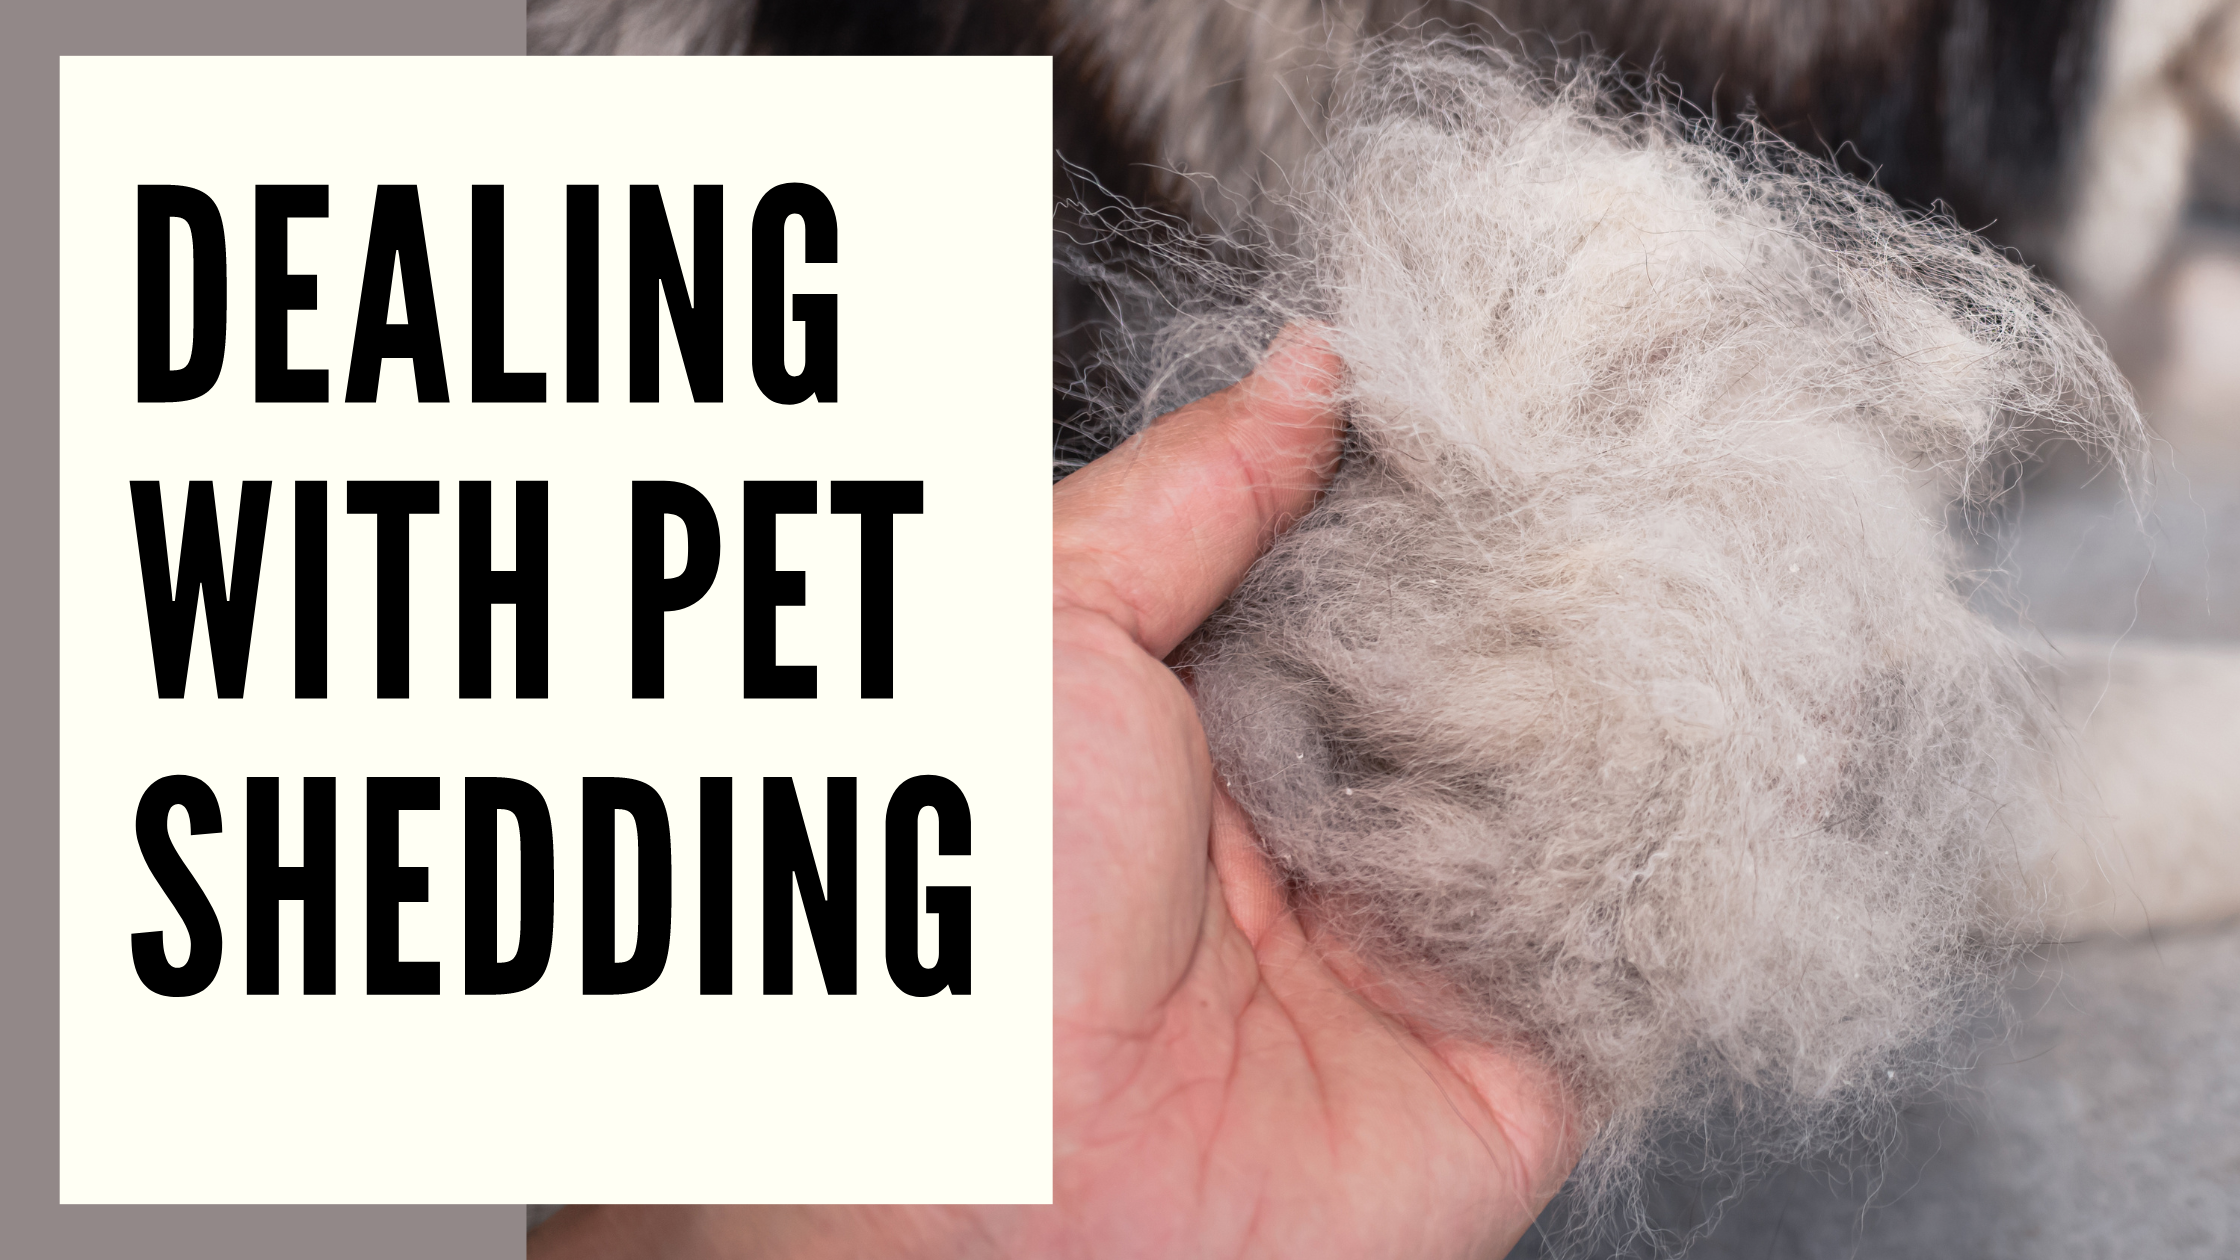 Dealing with Pet Shedding